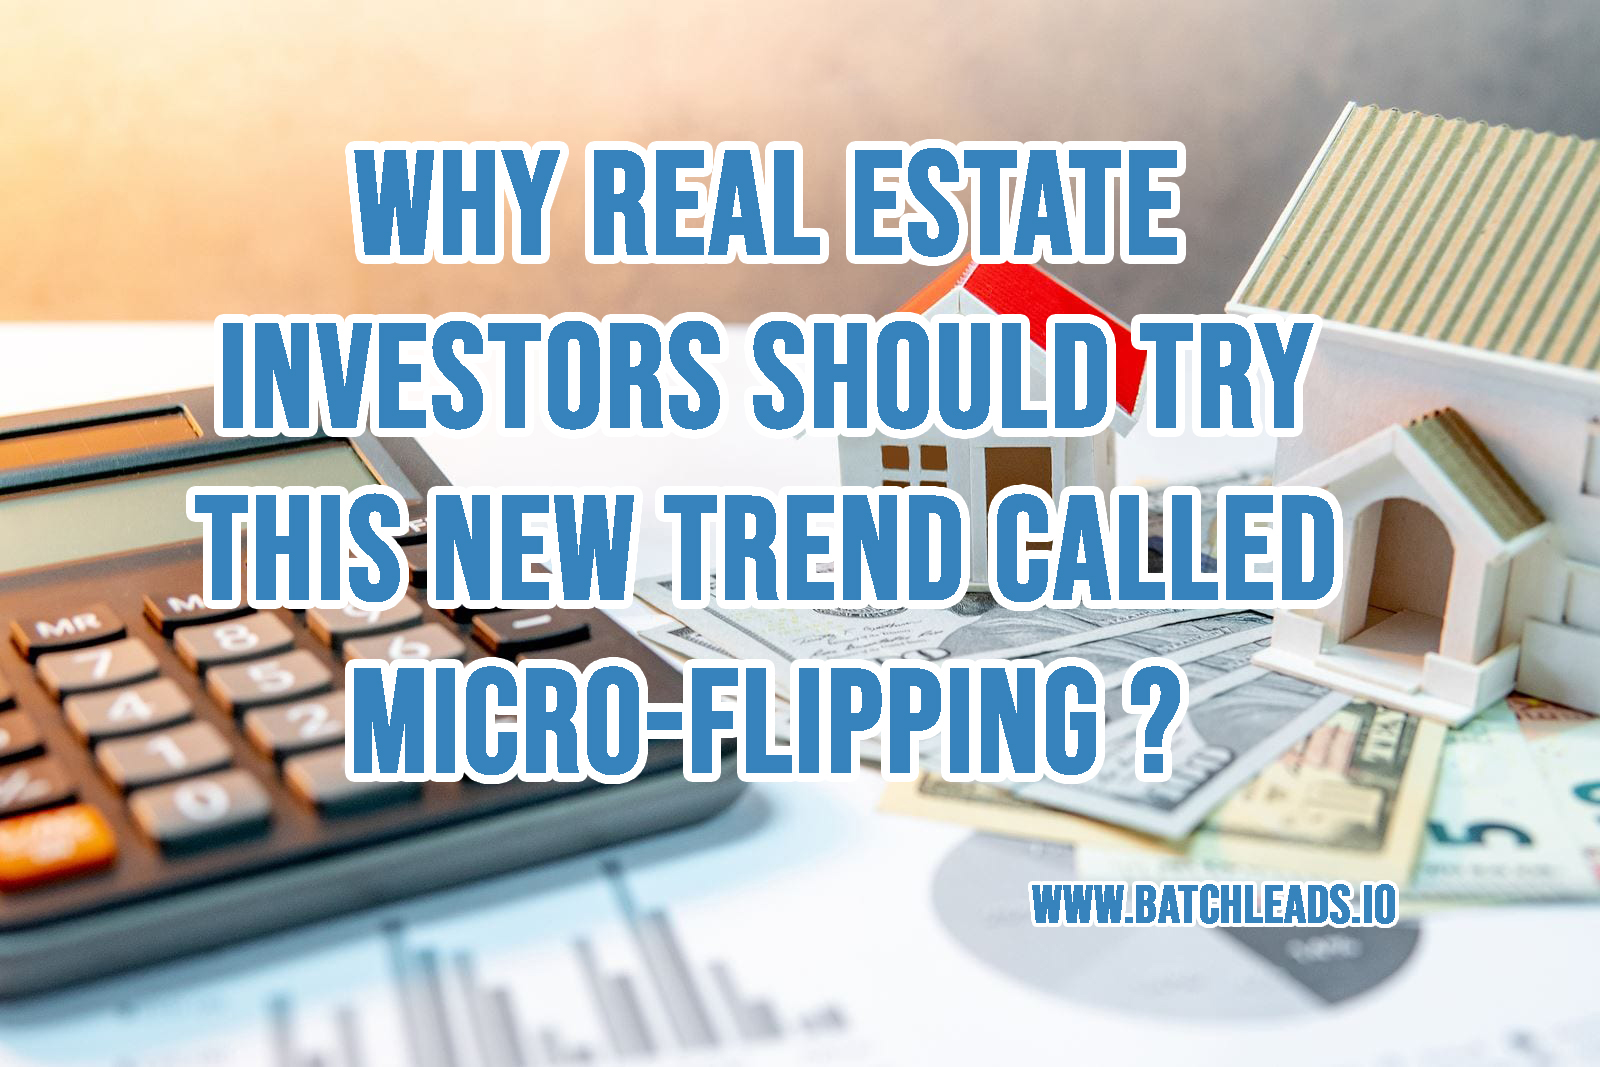 Why Real Estate Investors Should Try This New Trend Called Micro-Flipping